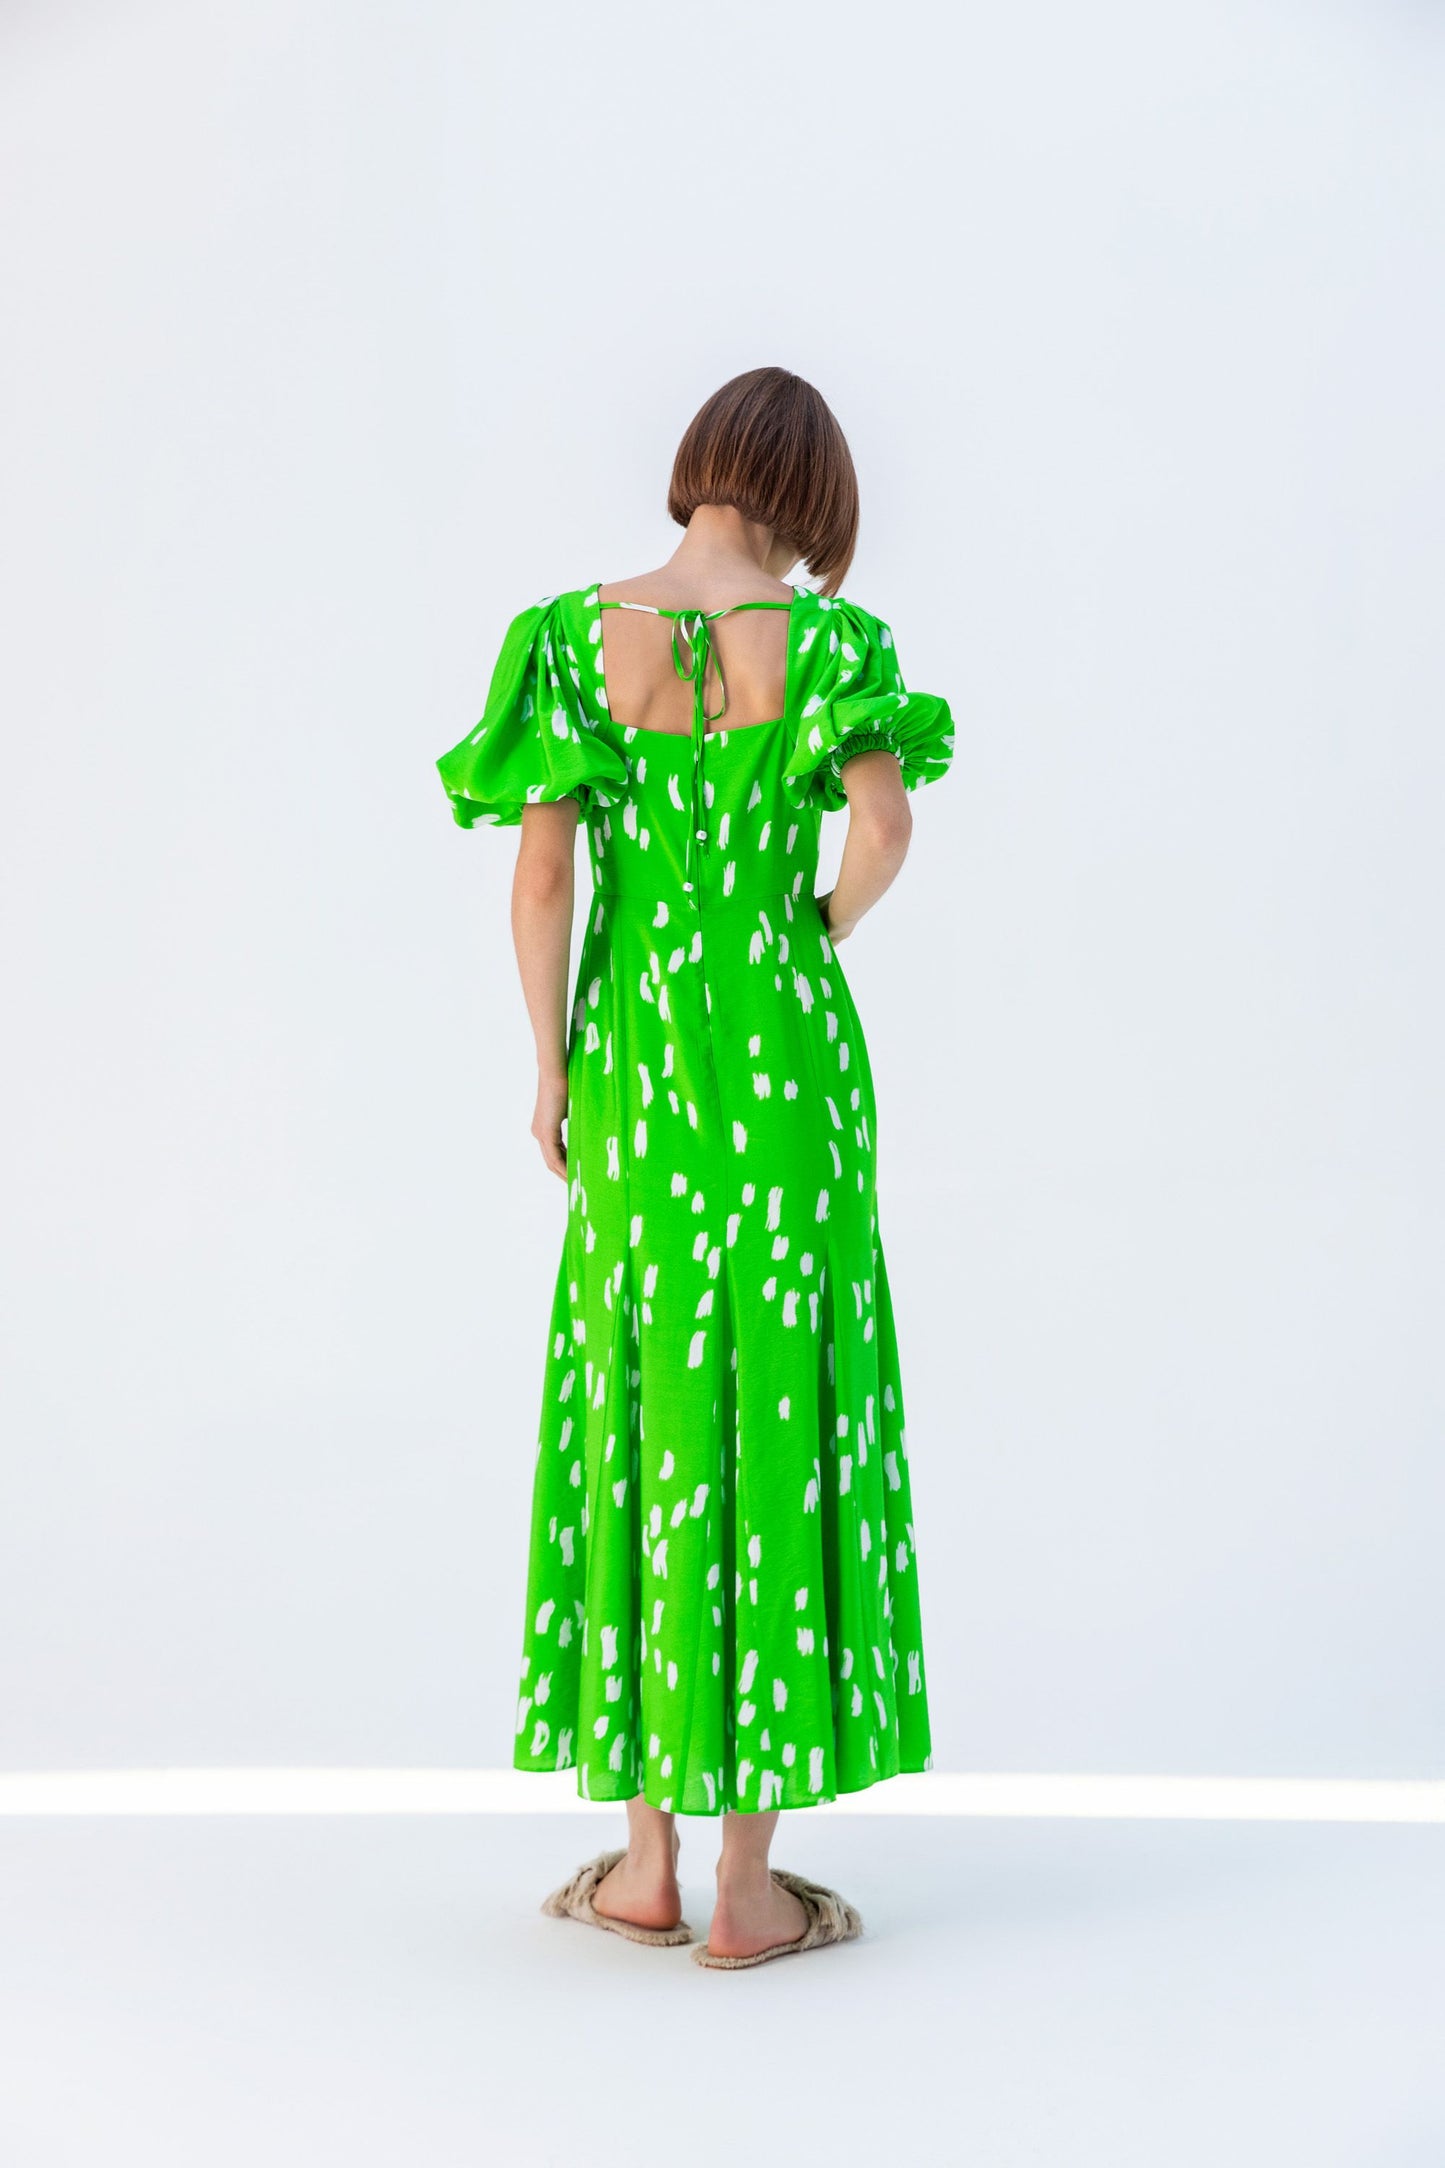 Neon Green and Cream Printed Fit and Flare Dress with Sleeve Detail and Tie at the Back